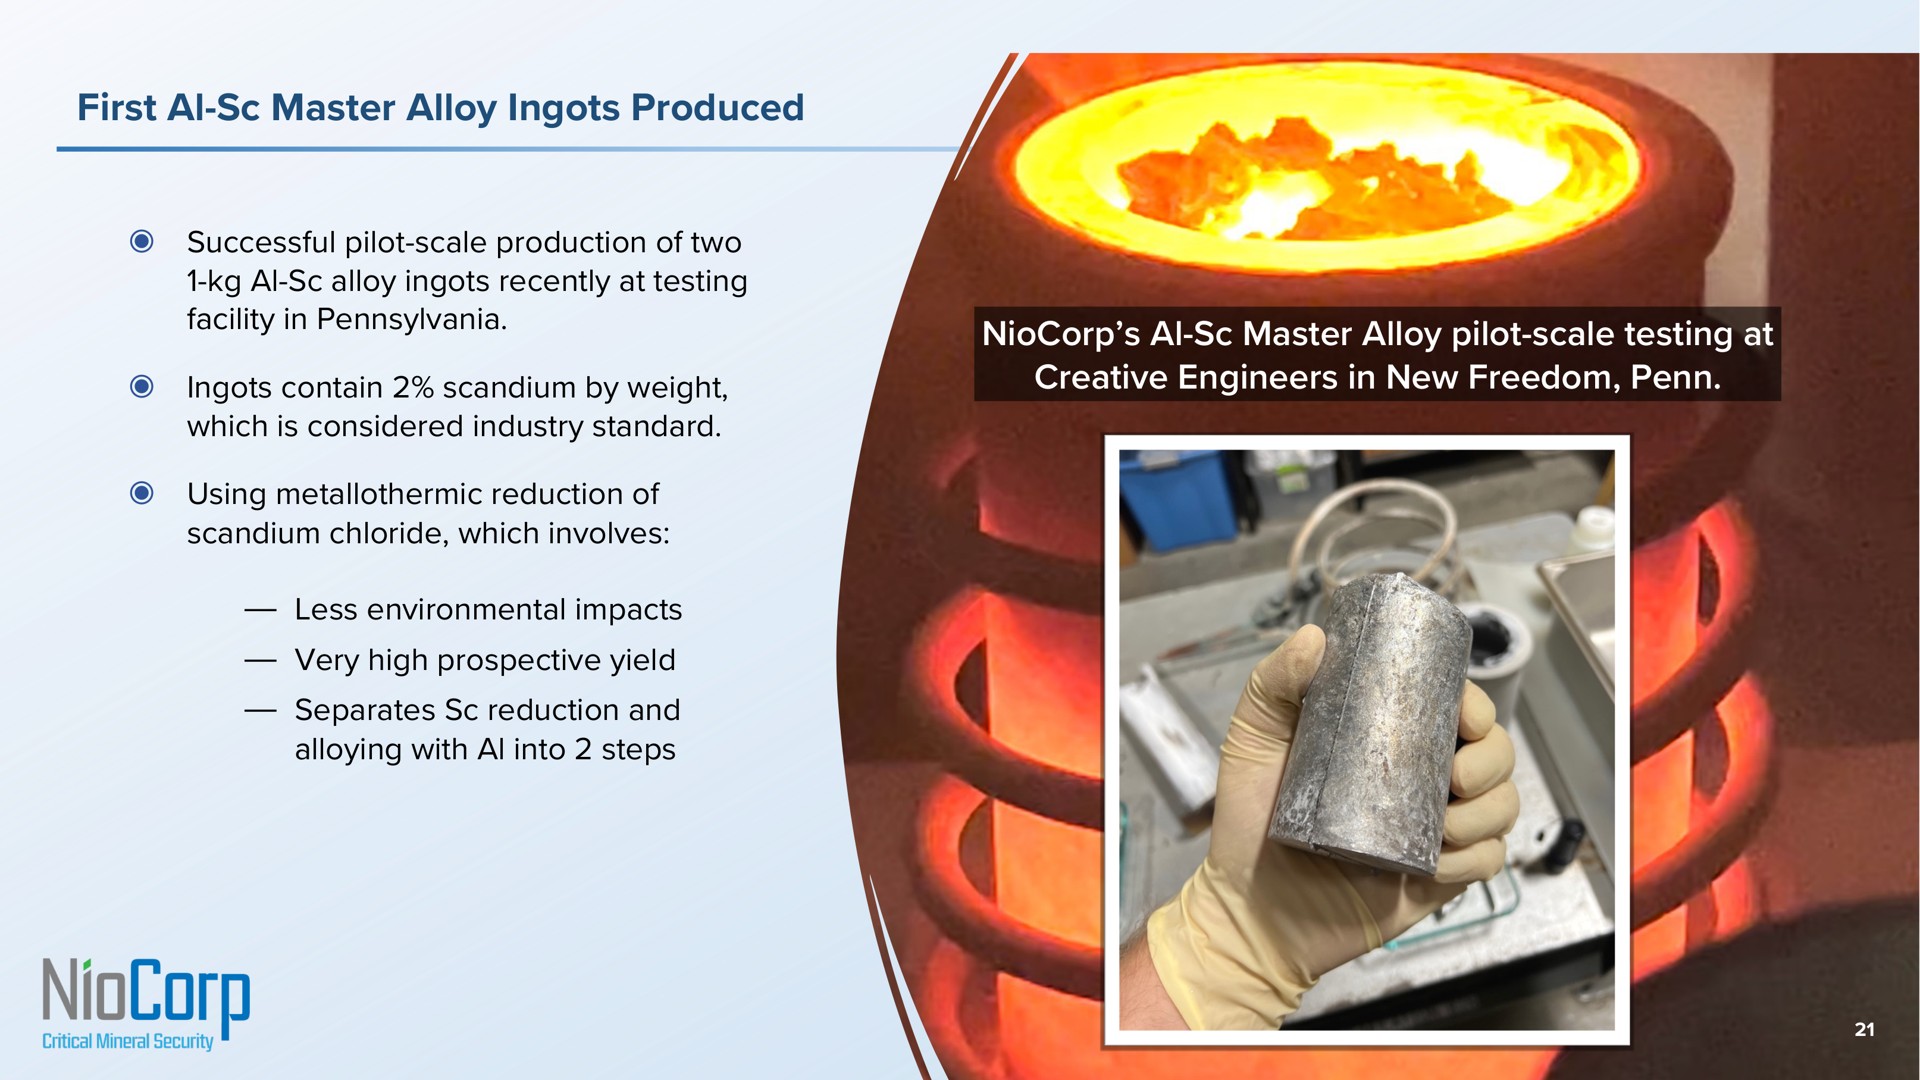 first master alloy ingots produced successful pilot scale production of two alloy ingots recently at testing facility in ingots contain scandium by weight which is considered industry standard using reduction of scandium chloride which involves less environmental impacts very high prospective yield separates reduction and alloying with into steps master alloy pilot scale testing at creative engineers in new freedom | NioCorp